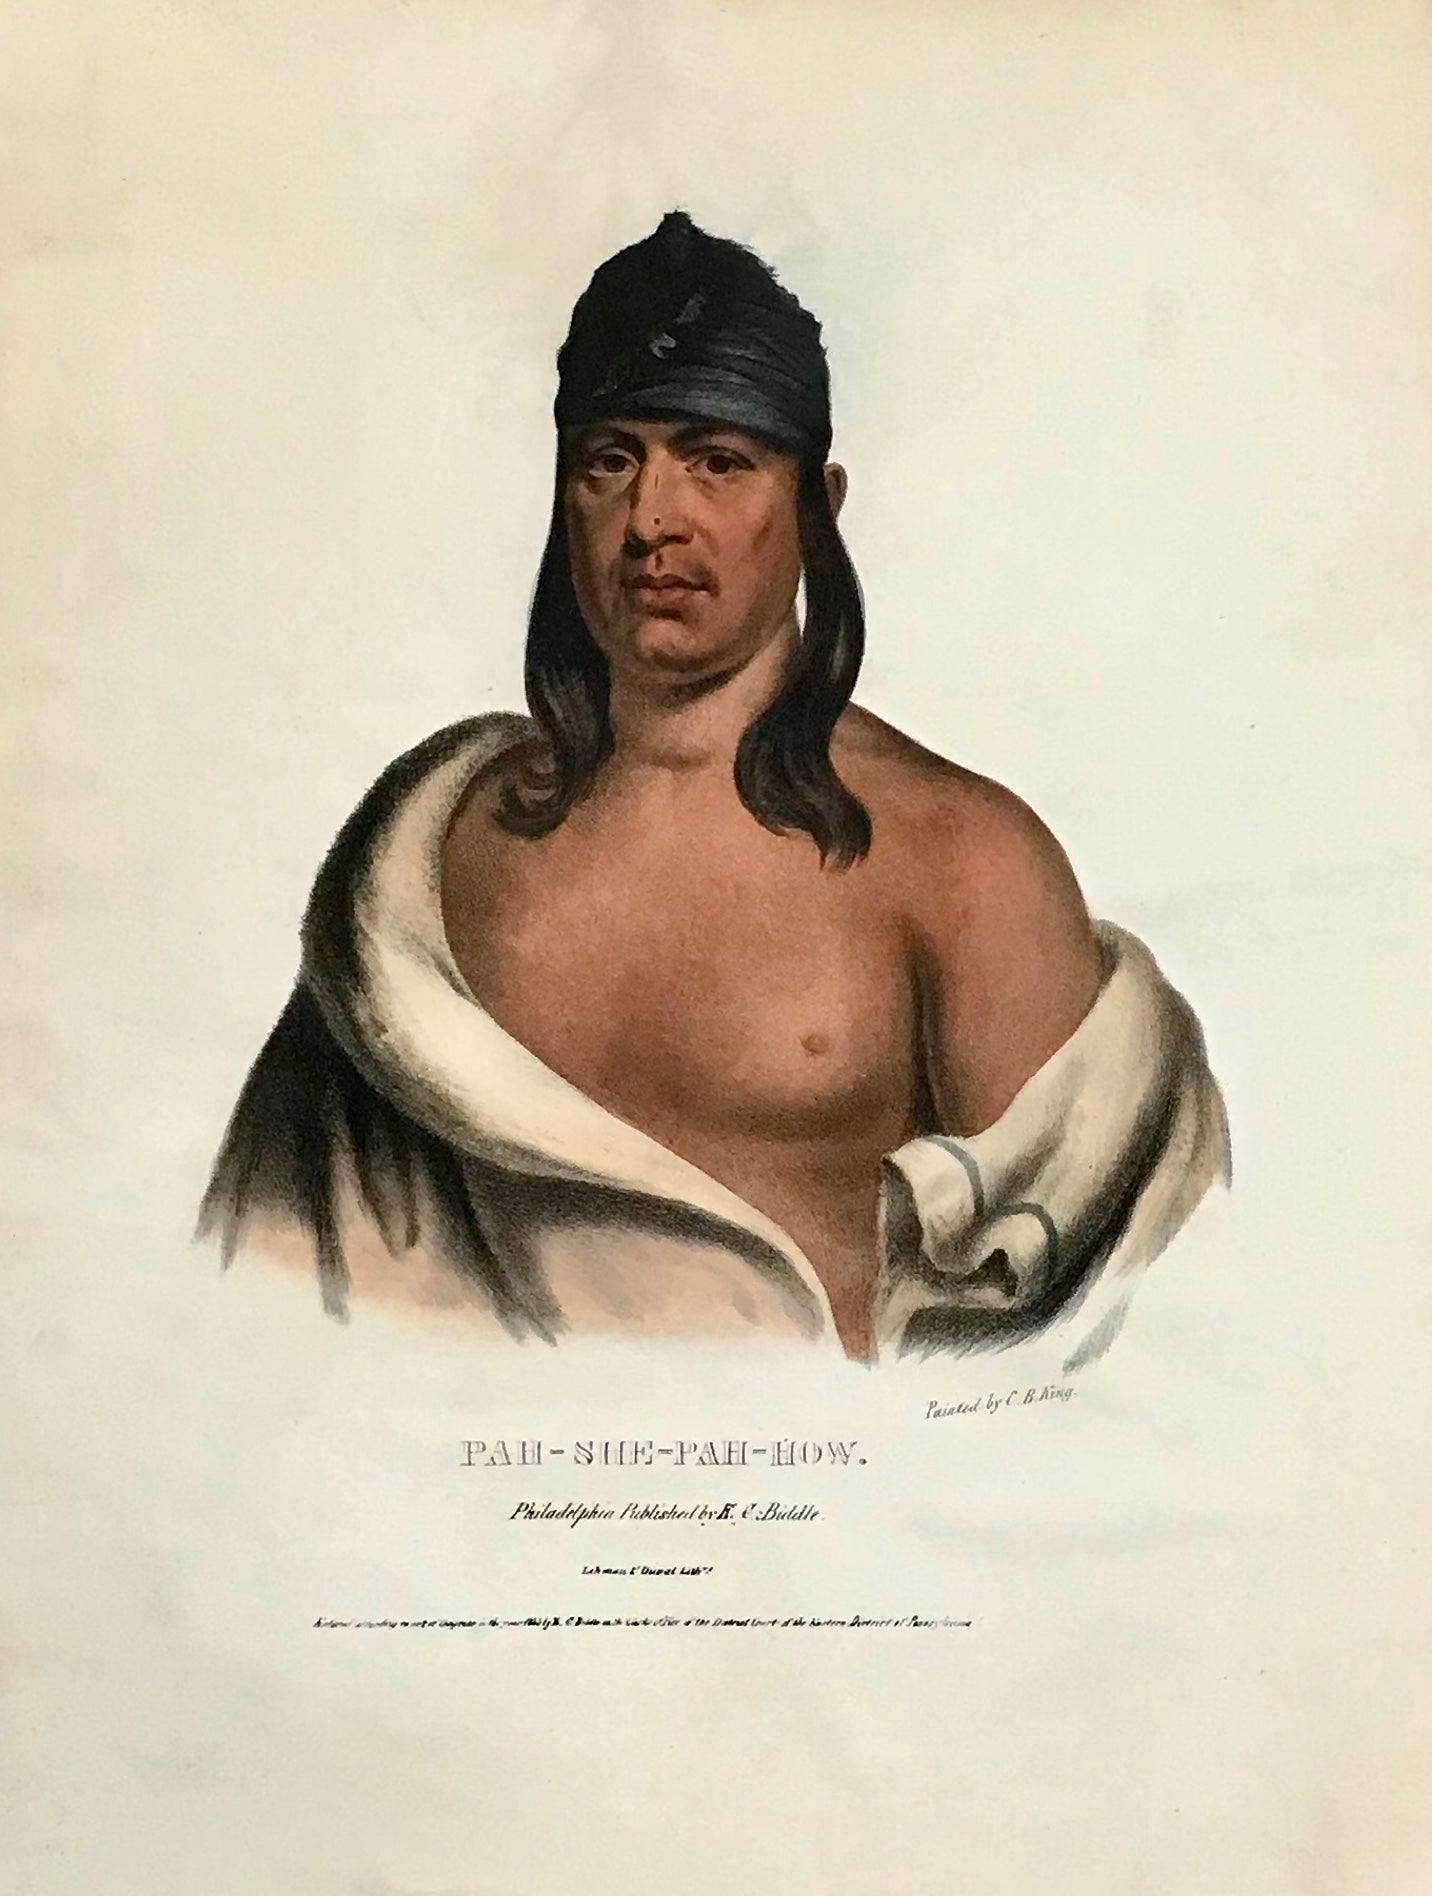  "Pah-She-Pah-How." Lithograph. Original hand coloring Painting by Charles Bird King (1785-1862) Published in: "History of the Indian Tribes of North America" Authors: Thomas Loraine McKenny (1785-1859) and James Hall (1793-1868)